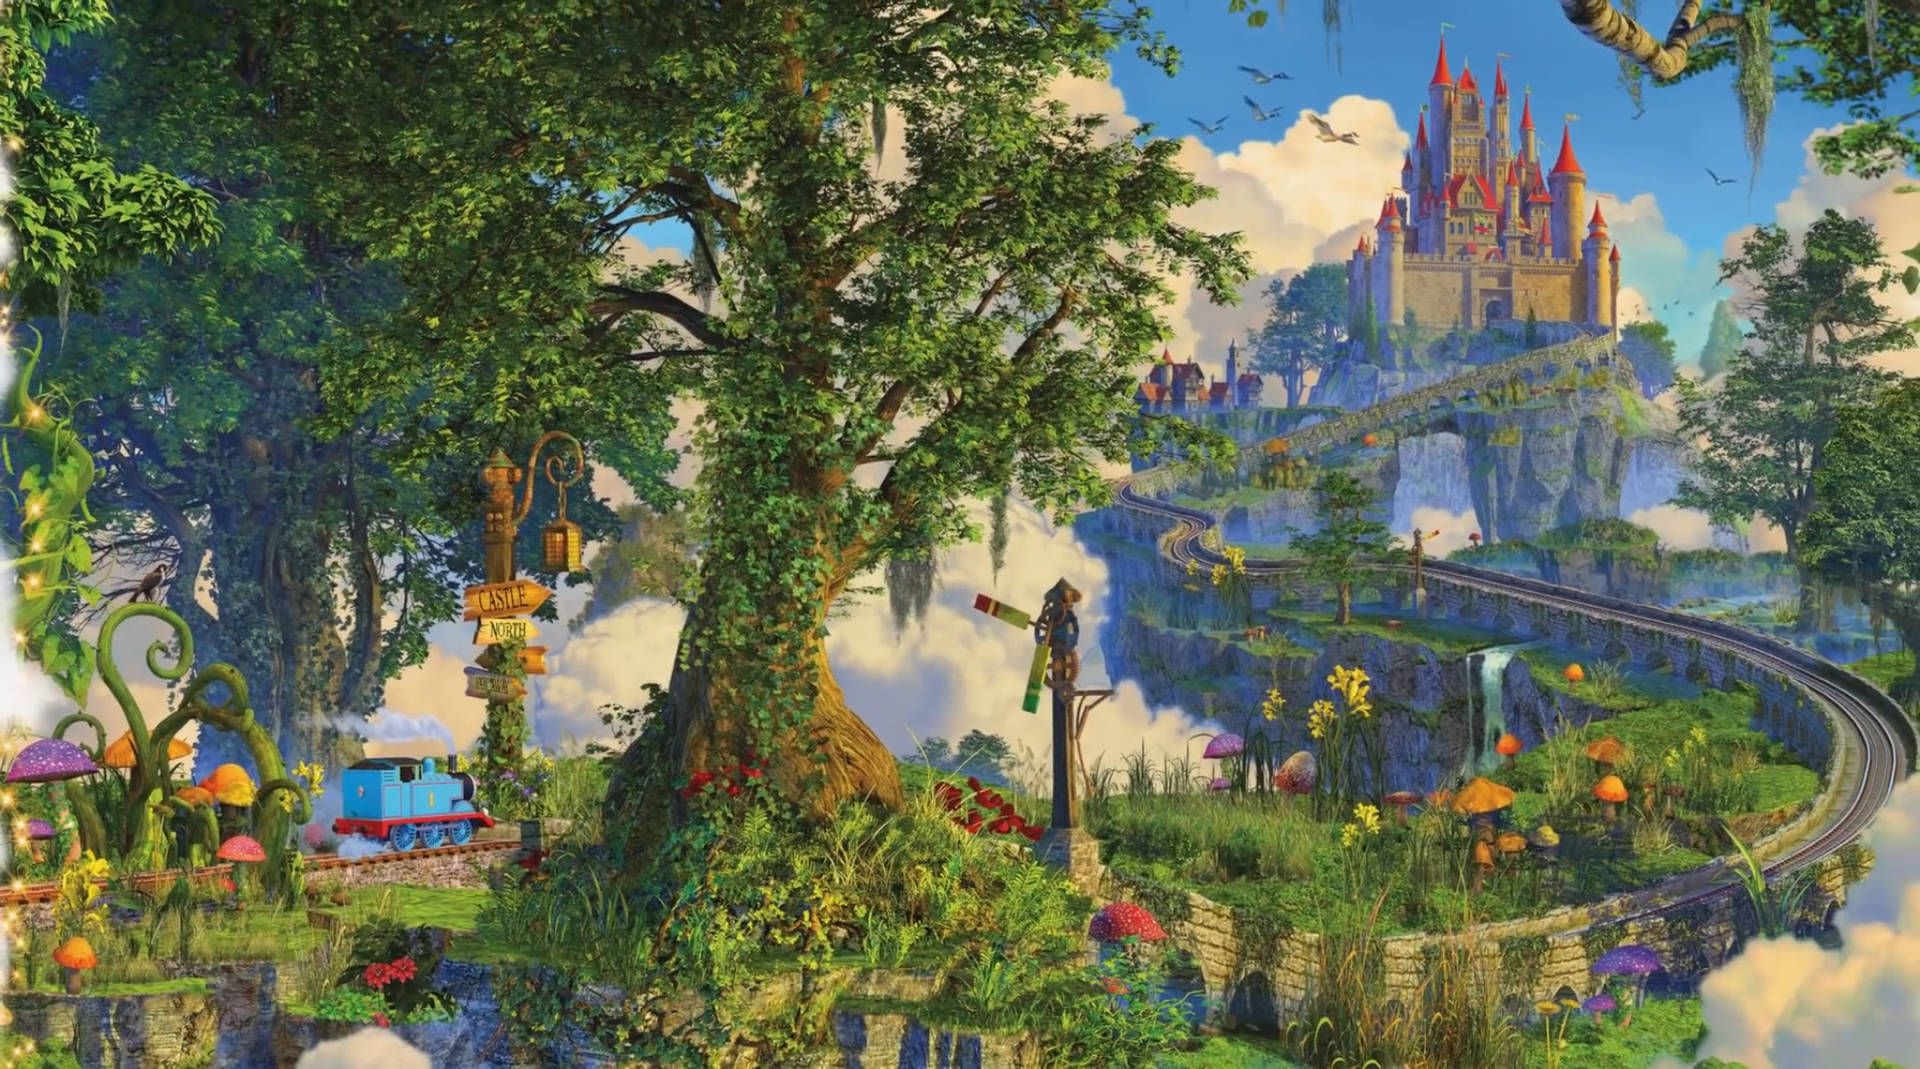 Grand Castle In An Enchanted Land Wallpaper